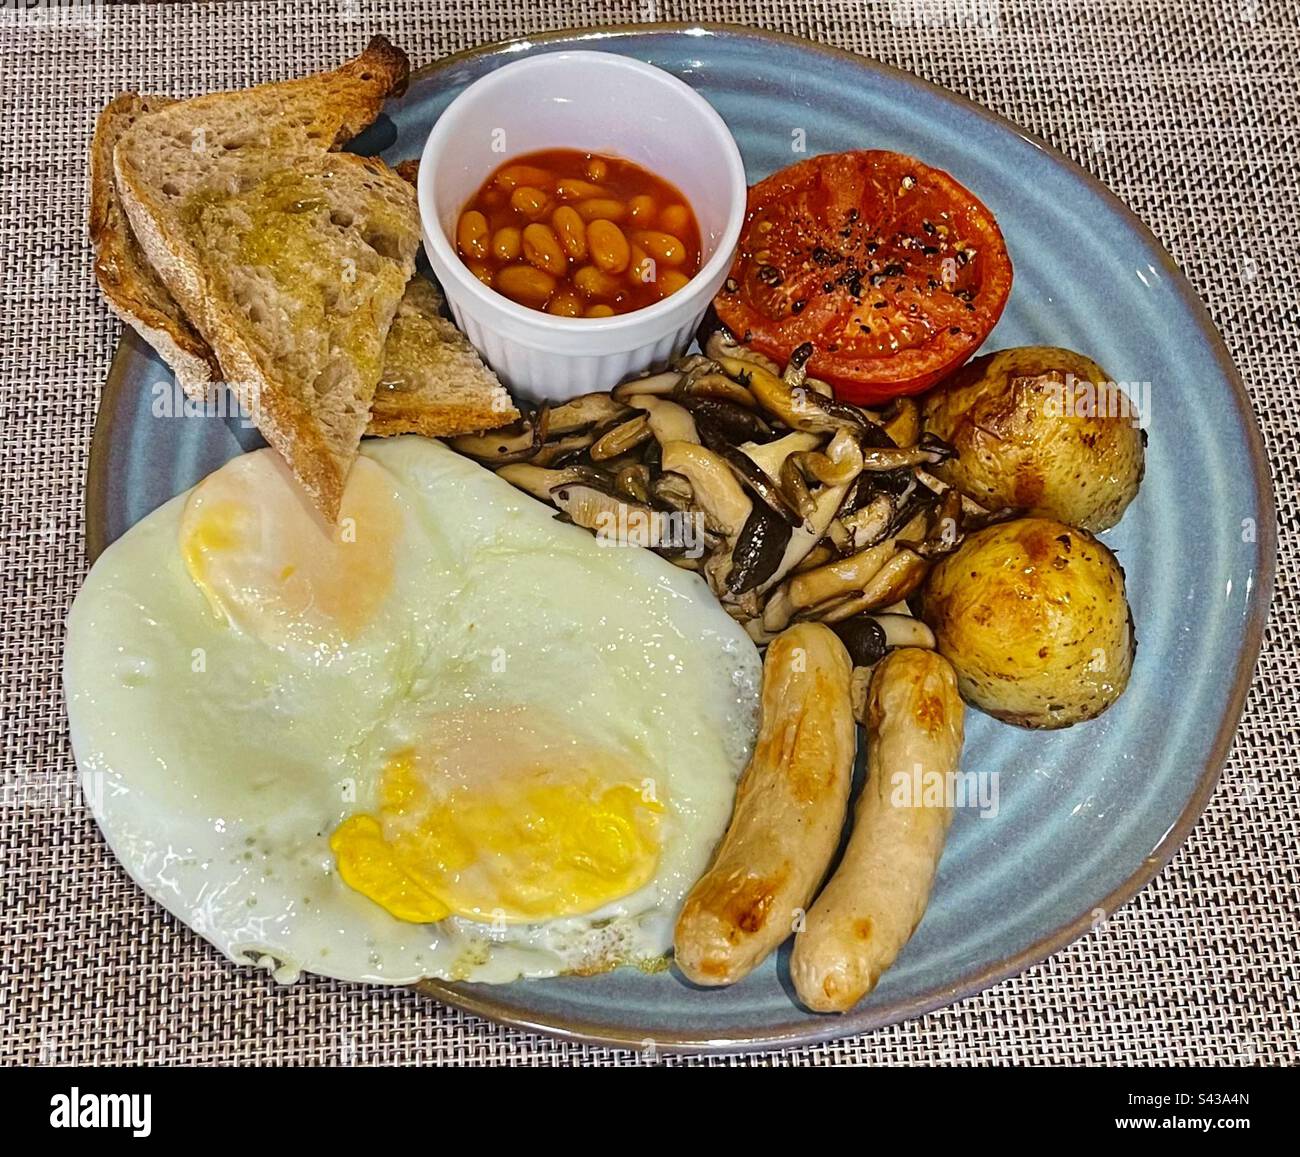 Eggs, sausage, beans potatoes and toast. Stock Photo